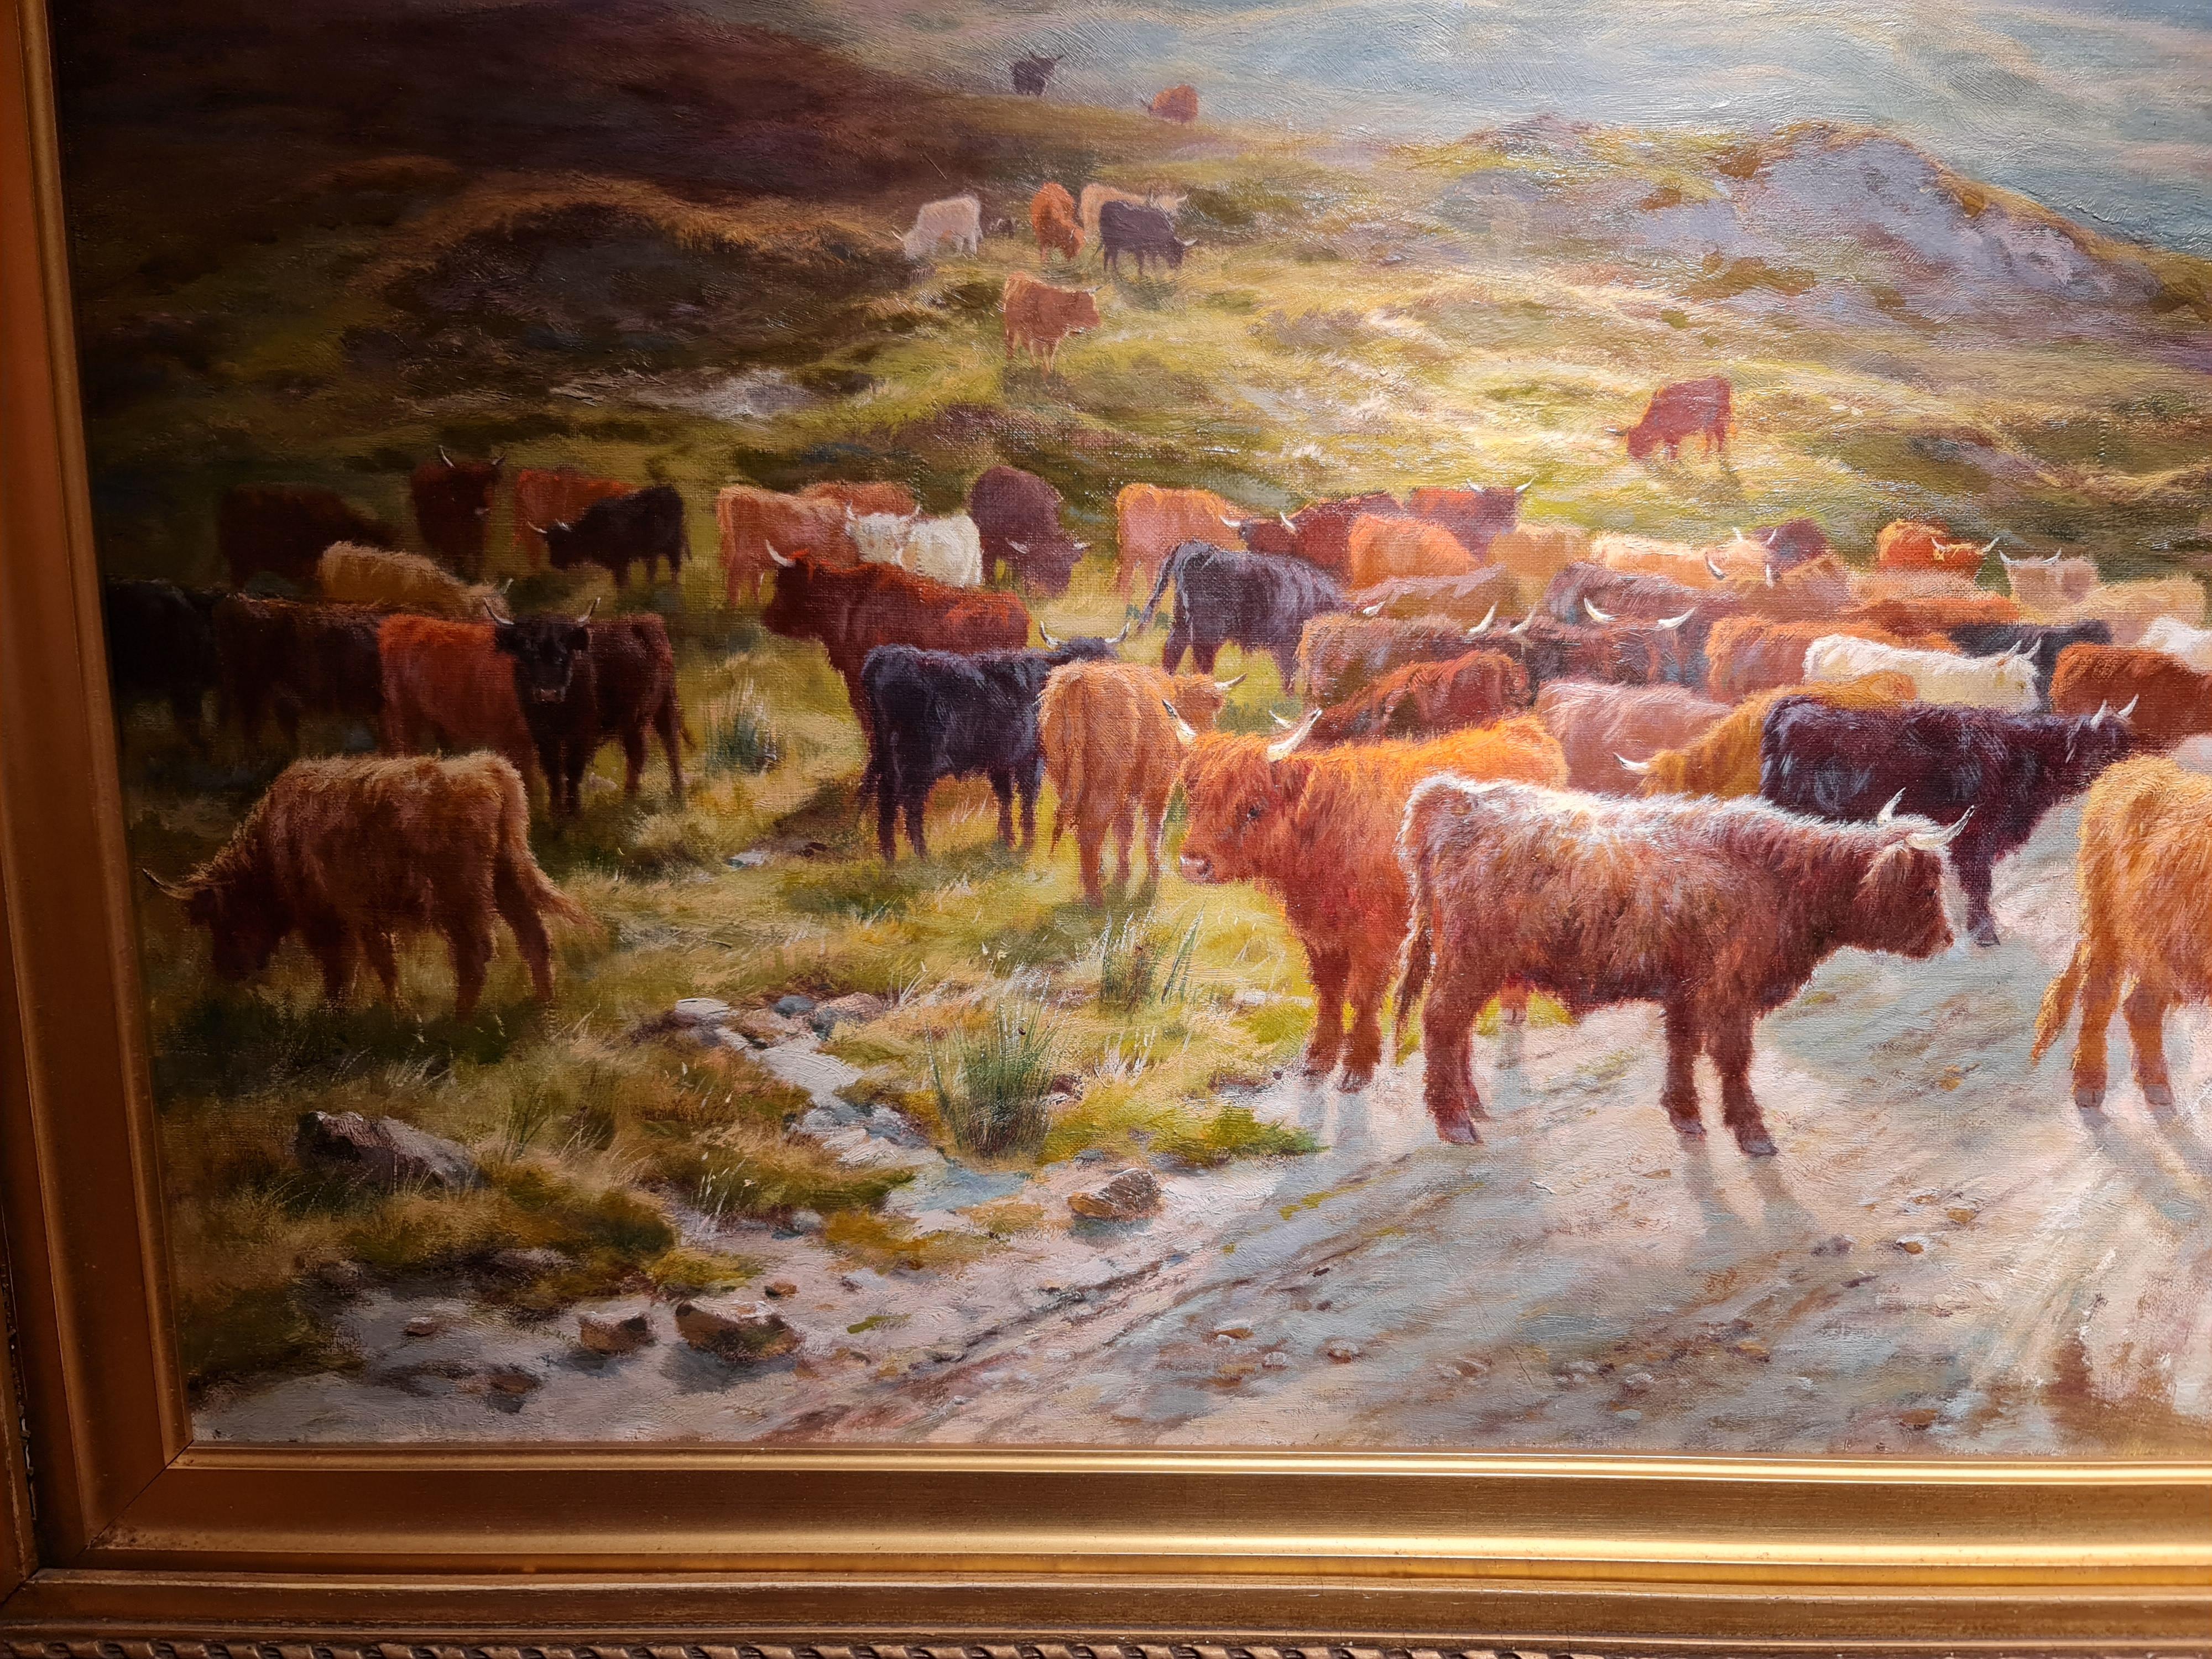 Highland Pastures
by Louis Bosworth Hurt
British 1856-1929

Oil on canvas
Canvas size: 24 x 36 inches
Framed size: 36.25 x 48 inches

Signed and dated lower right